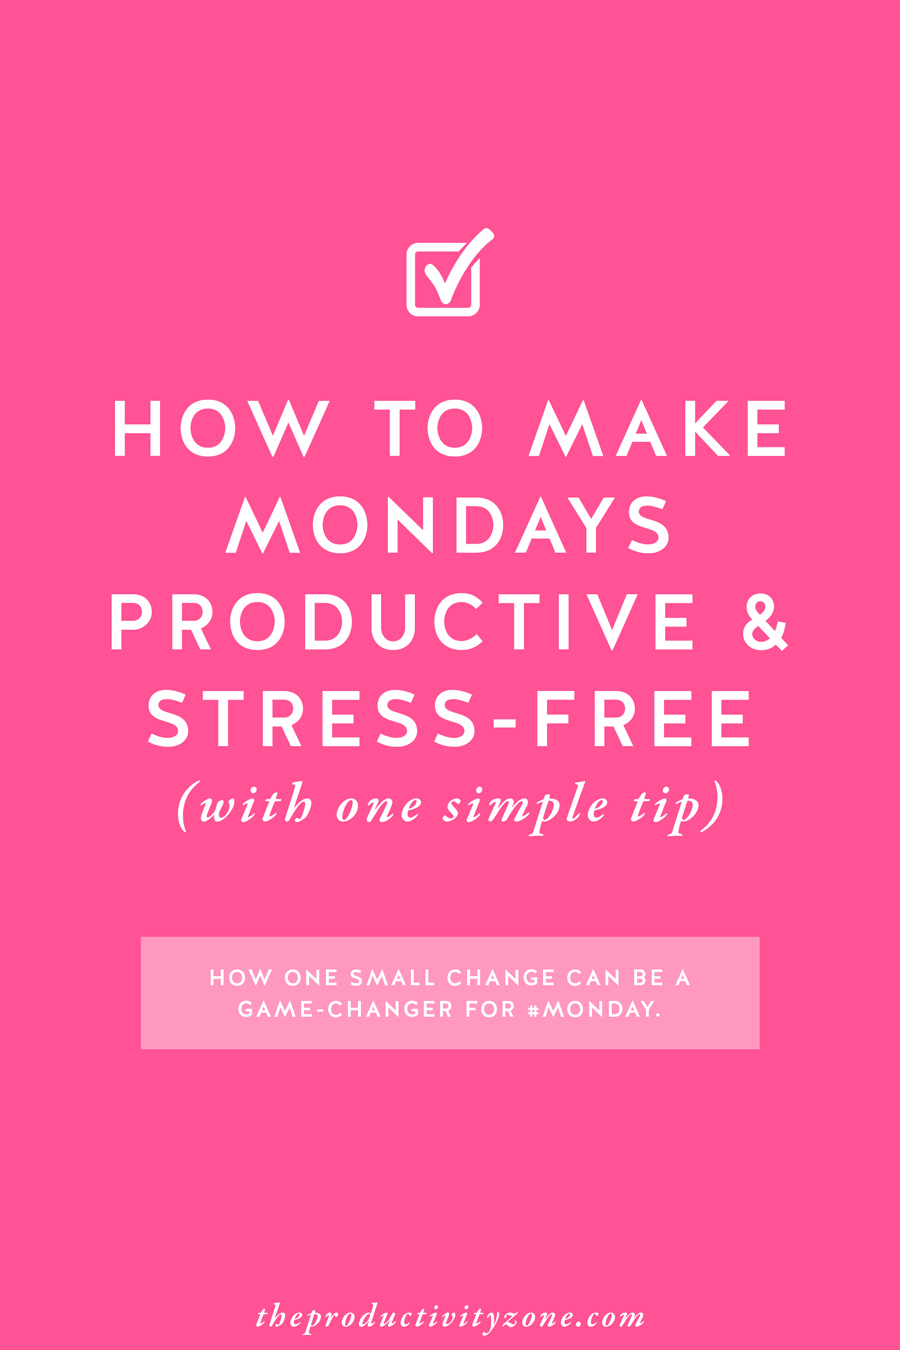 How to make Mondays productive and stress-free with one simple tip that will completely change the way you schedule your week and shoot your productivity through the roof on The Productivity Zone!!